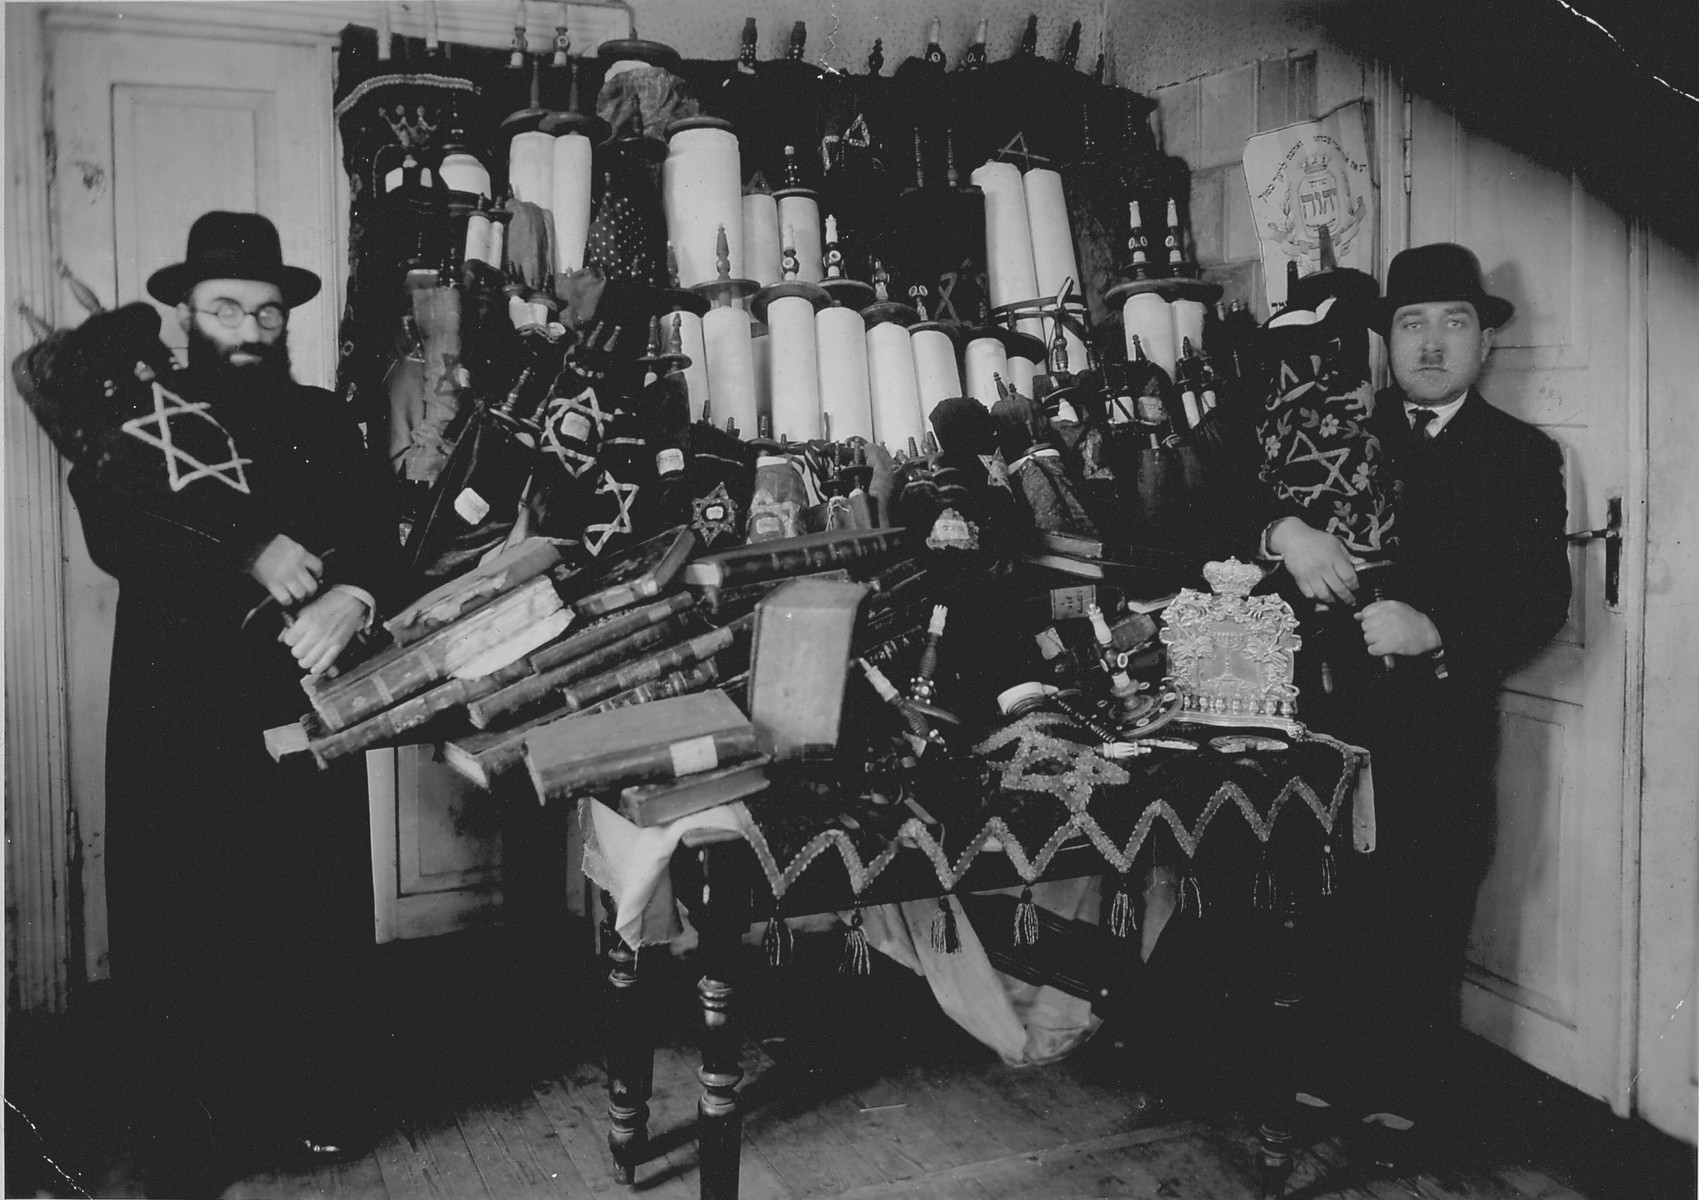 Rabbi Lifszyc (left) and another man pose in front of a cabinet full of Torah scrolls that were smuggled out of Suwalki.

Sixty scrolls and other holy items were rescued from hiding places in Suwalki, which had been occupied by Germany, and were taken to the synagogue in Kalvarija for safety.  While Lifszyc was in Vilnius, he tried to save the Torah scrolls from the Russian occupiers, but had to flee Vilnius and leave these behind.